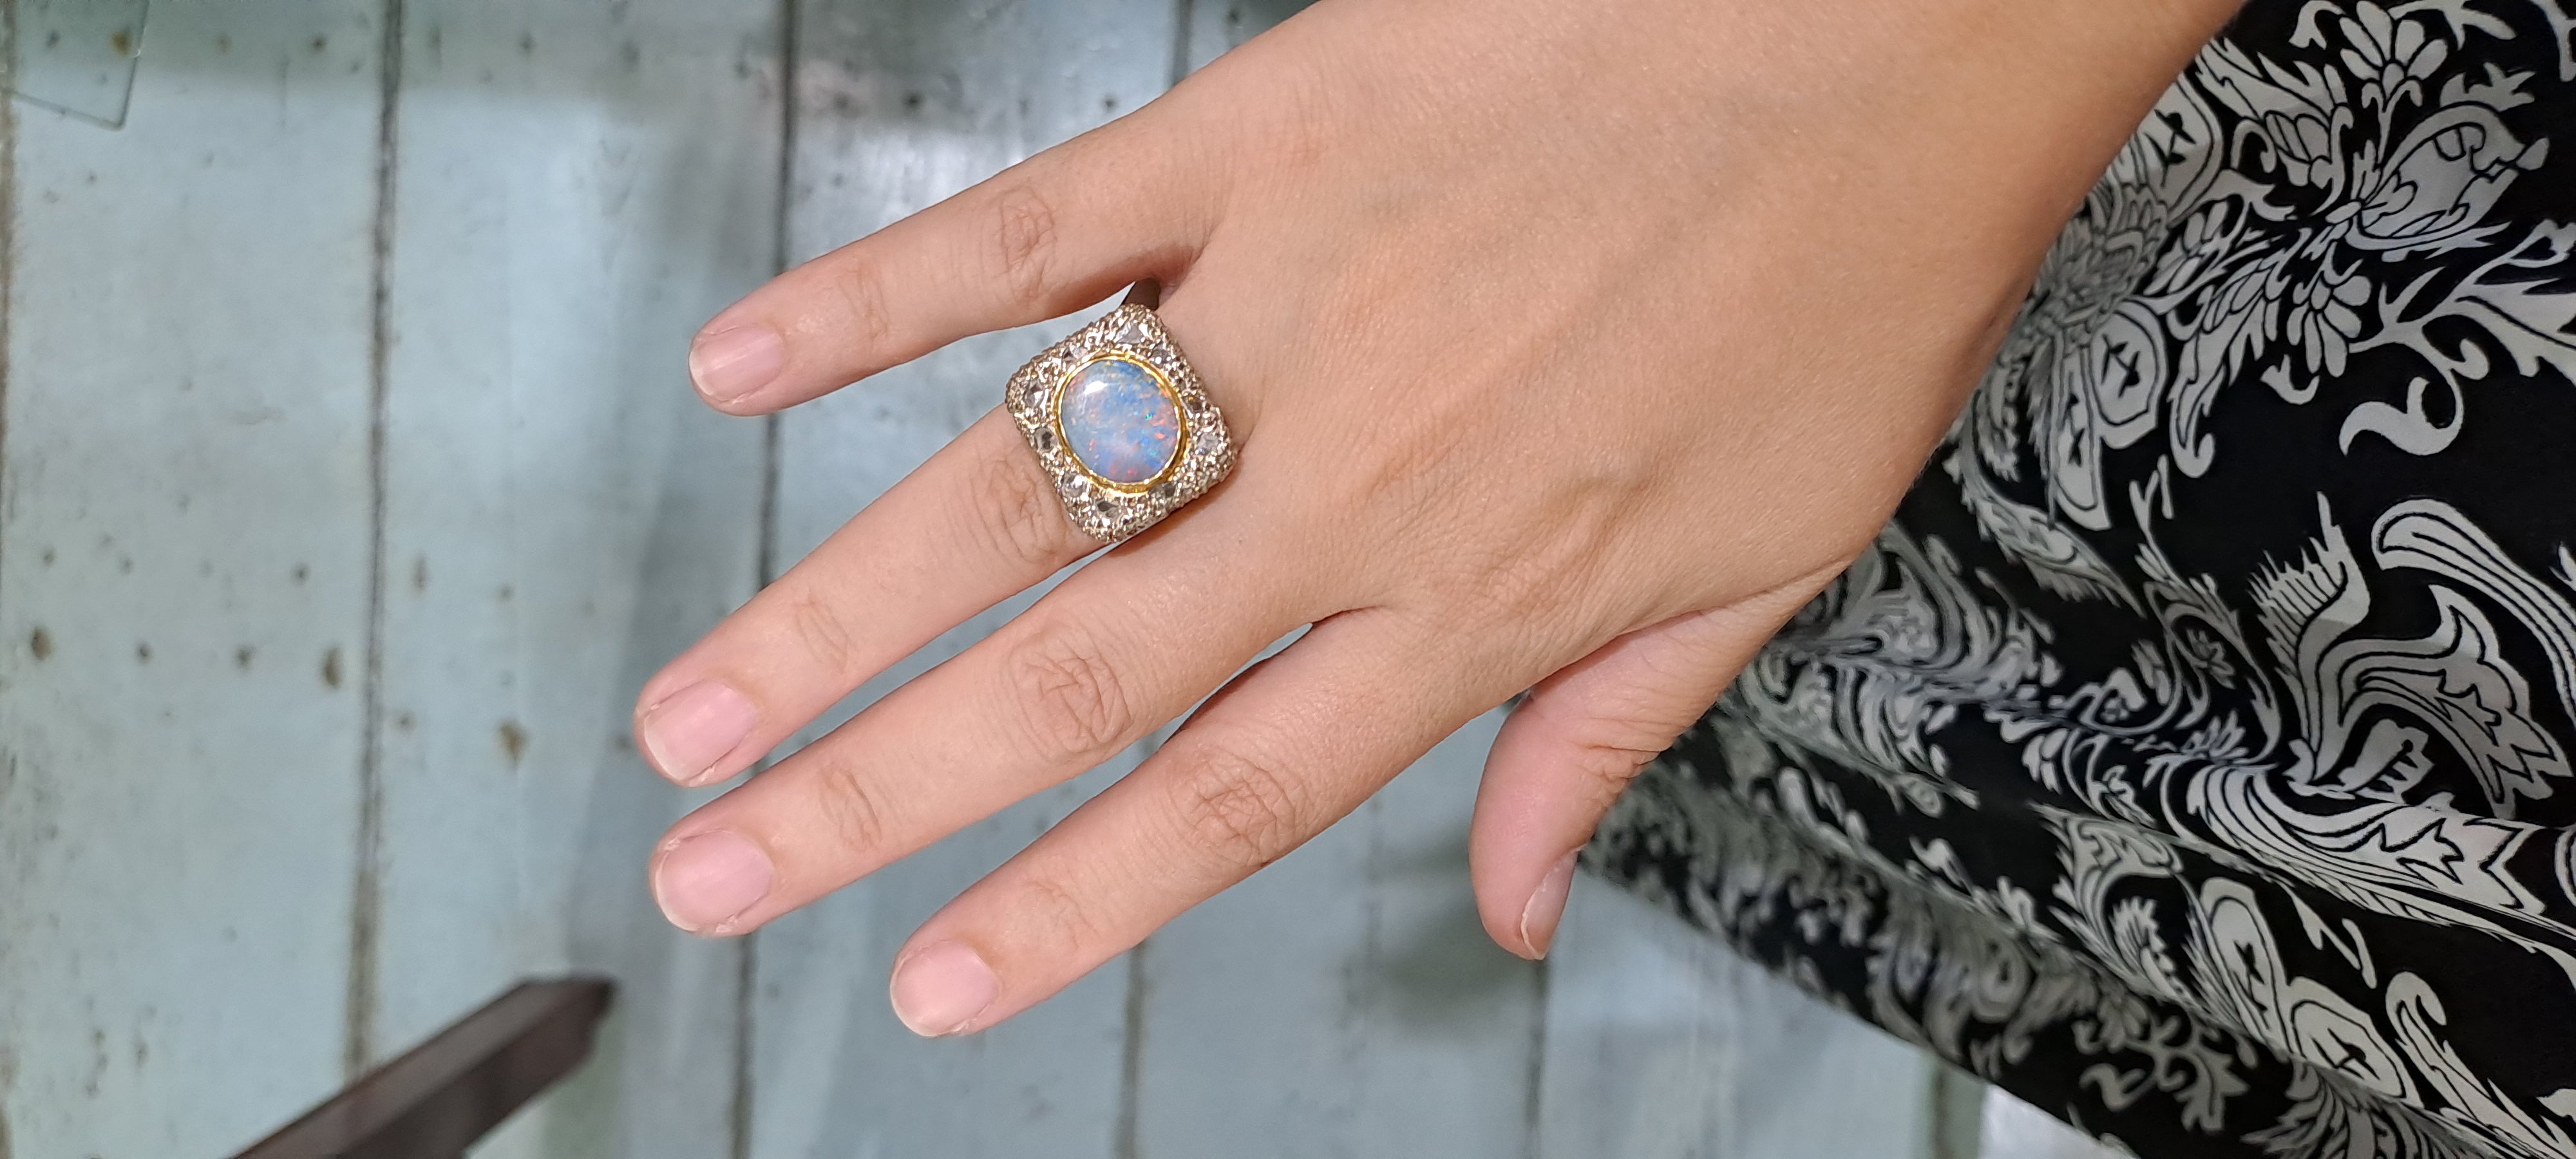 Ring in 18k Gold with an Australian bulder opal and diamonds chips (B-15)